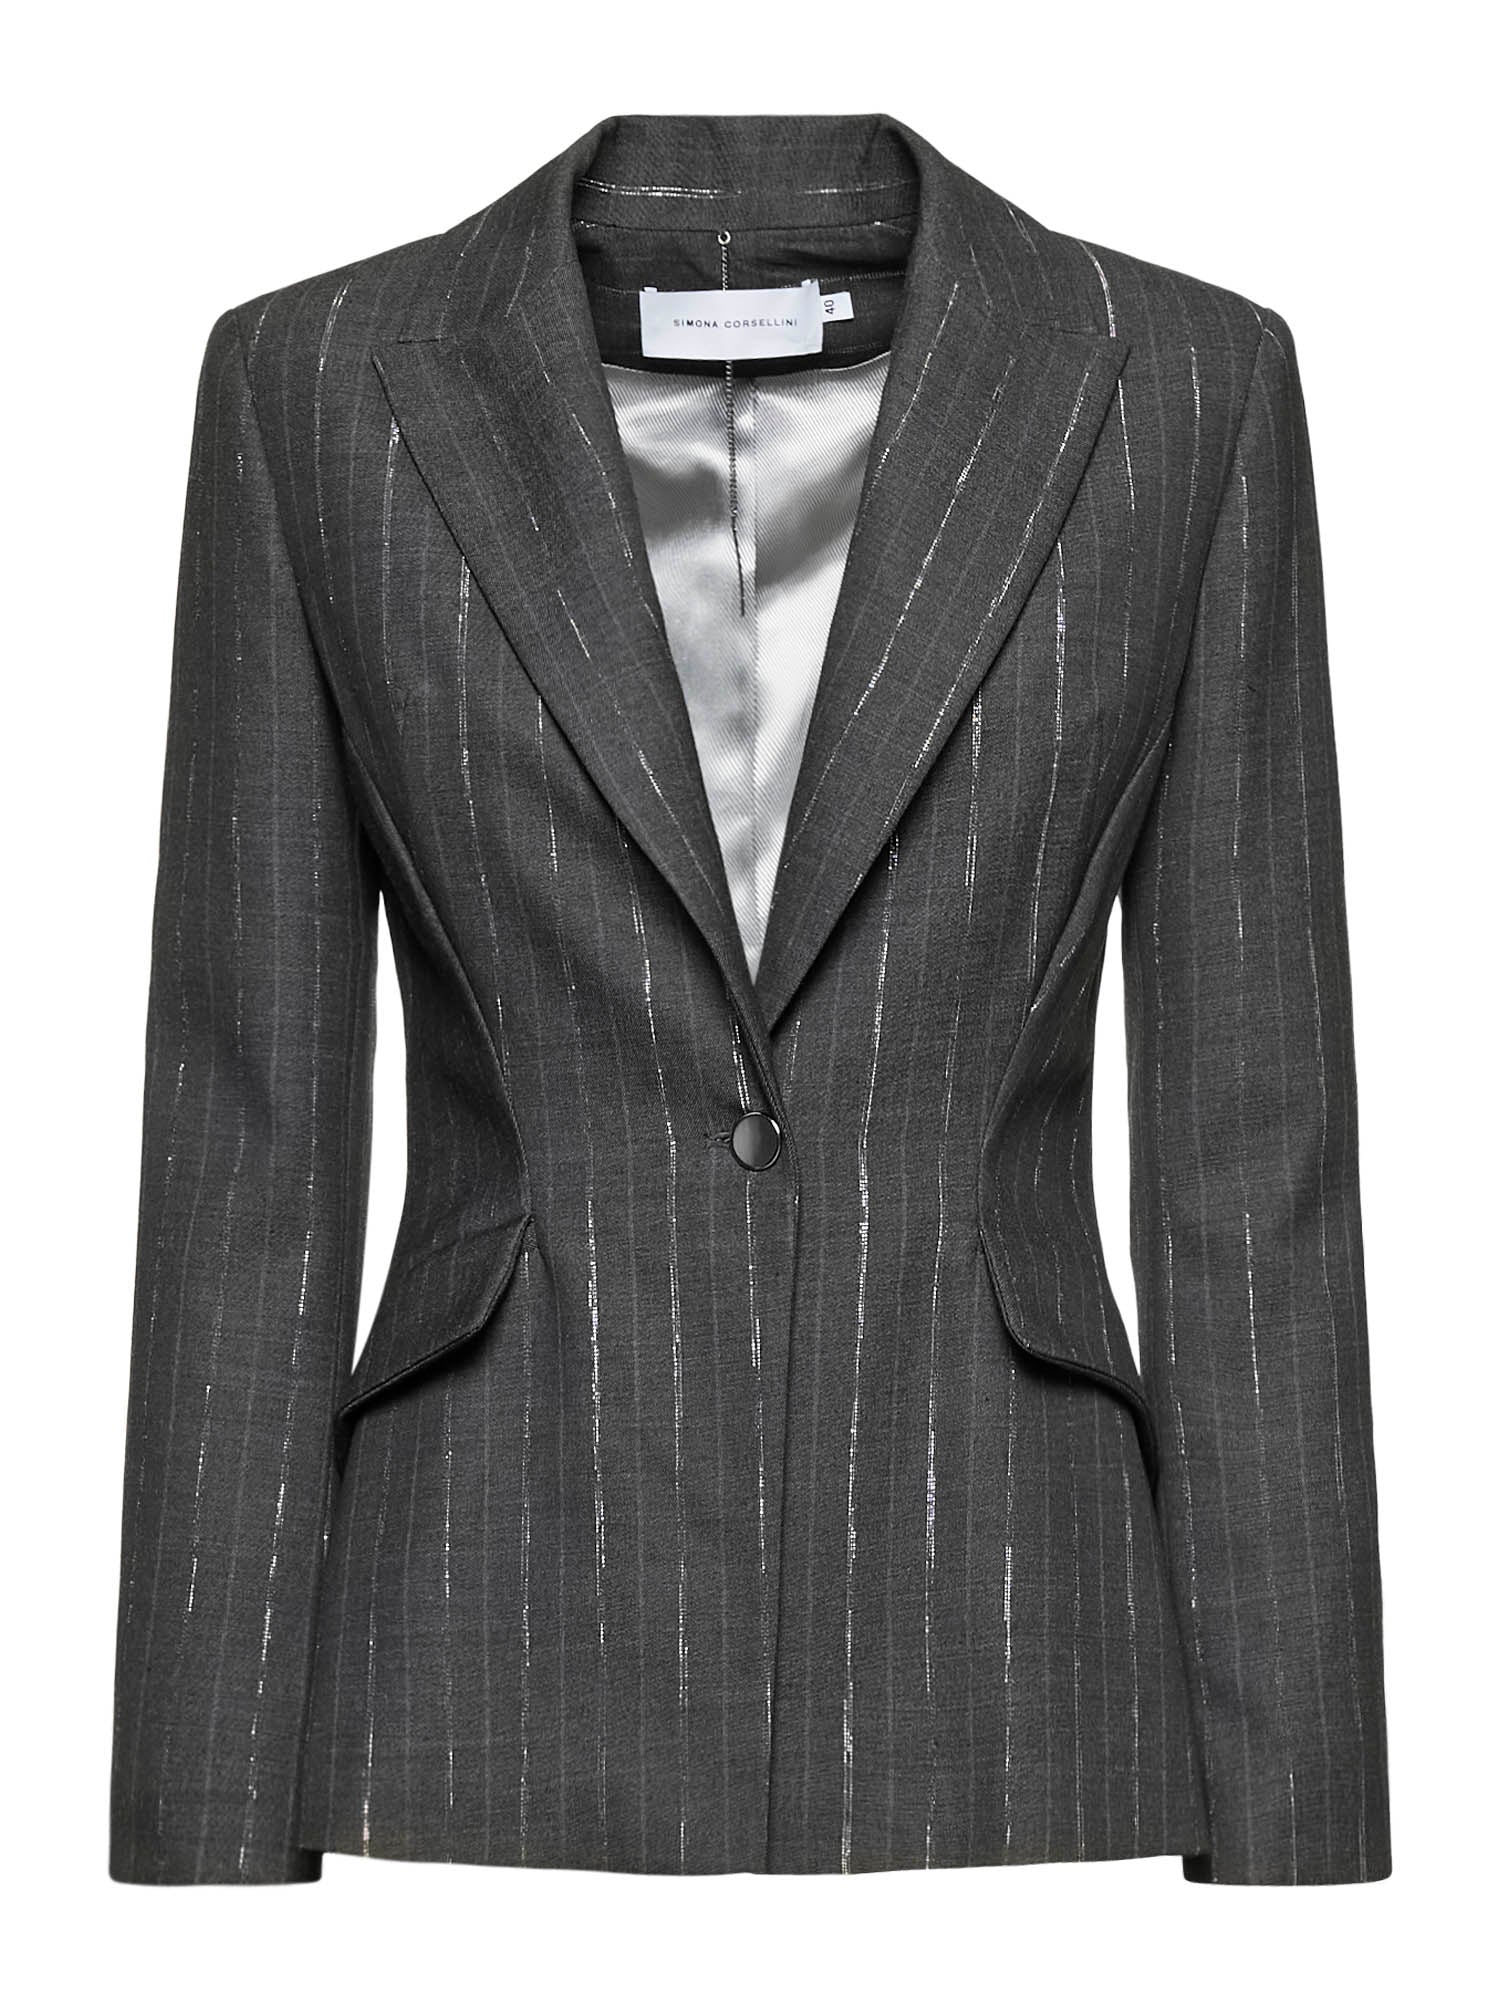 Single-breasted jacket in translucent pinstripe